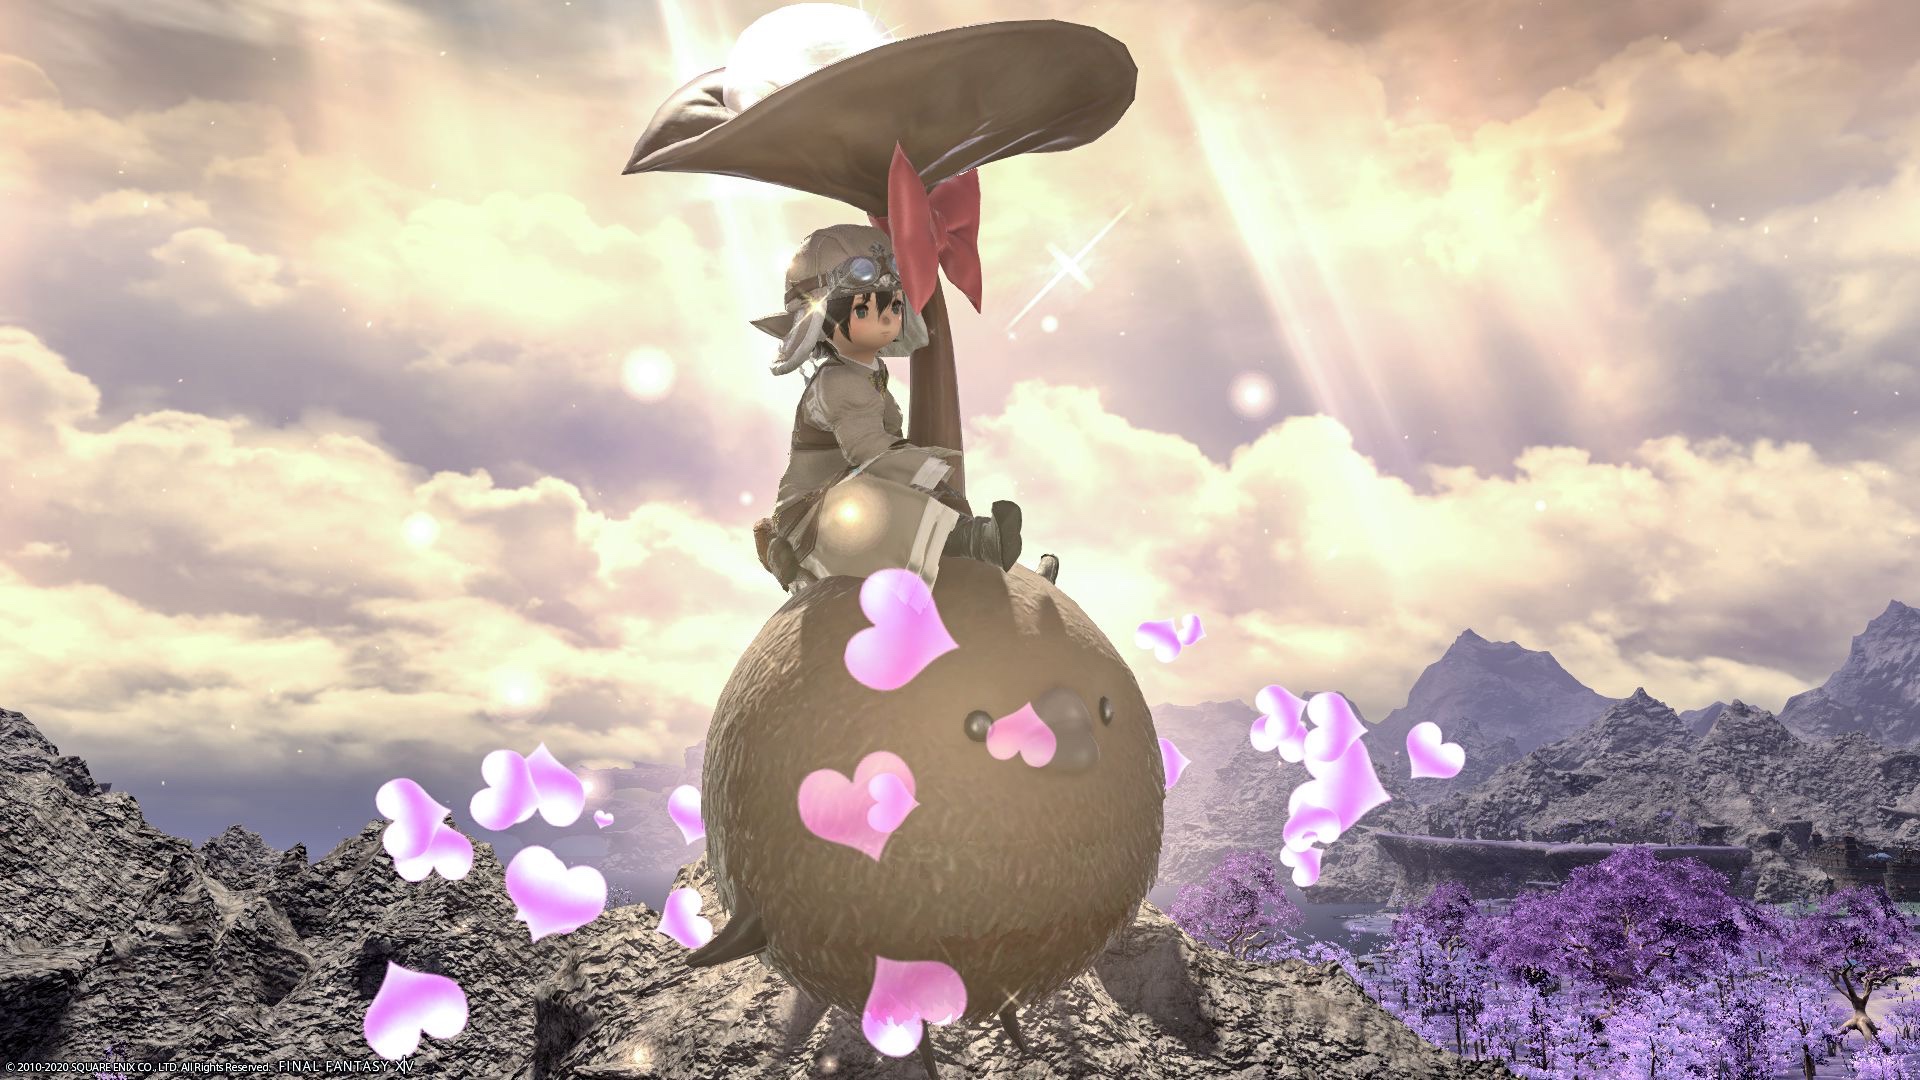 These Final Fantasy XIV Valentine's Day cards are the perfect way to